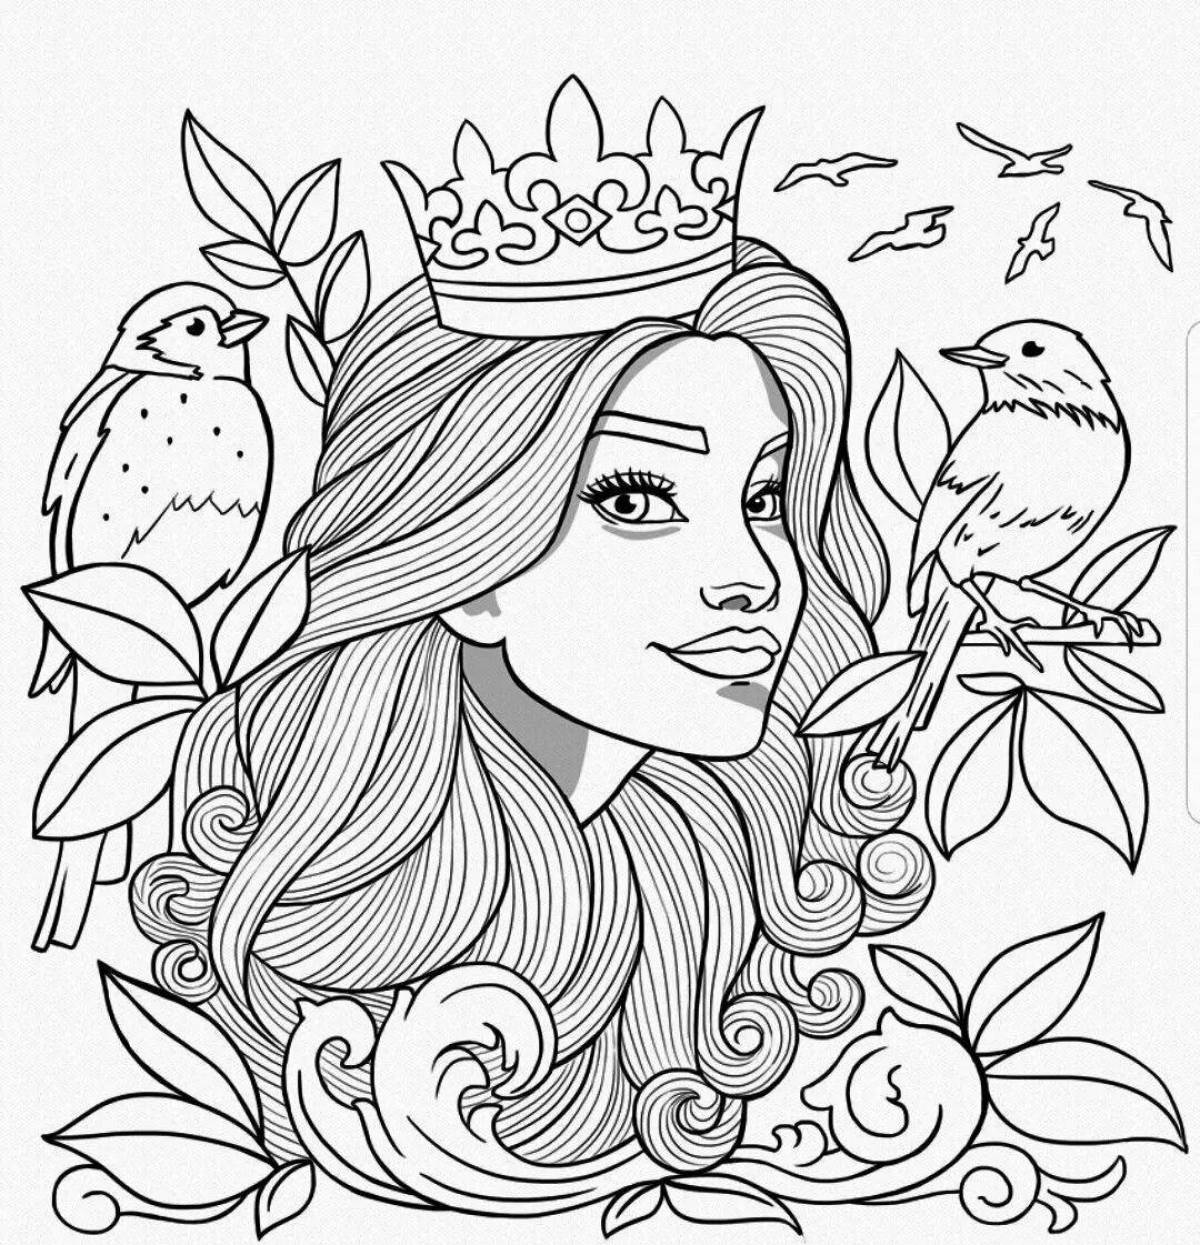 Charming coloring book for girls 14 years old